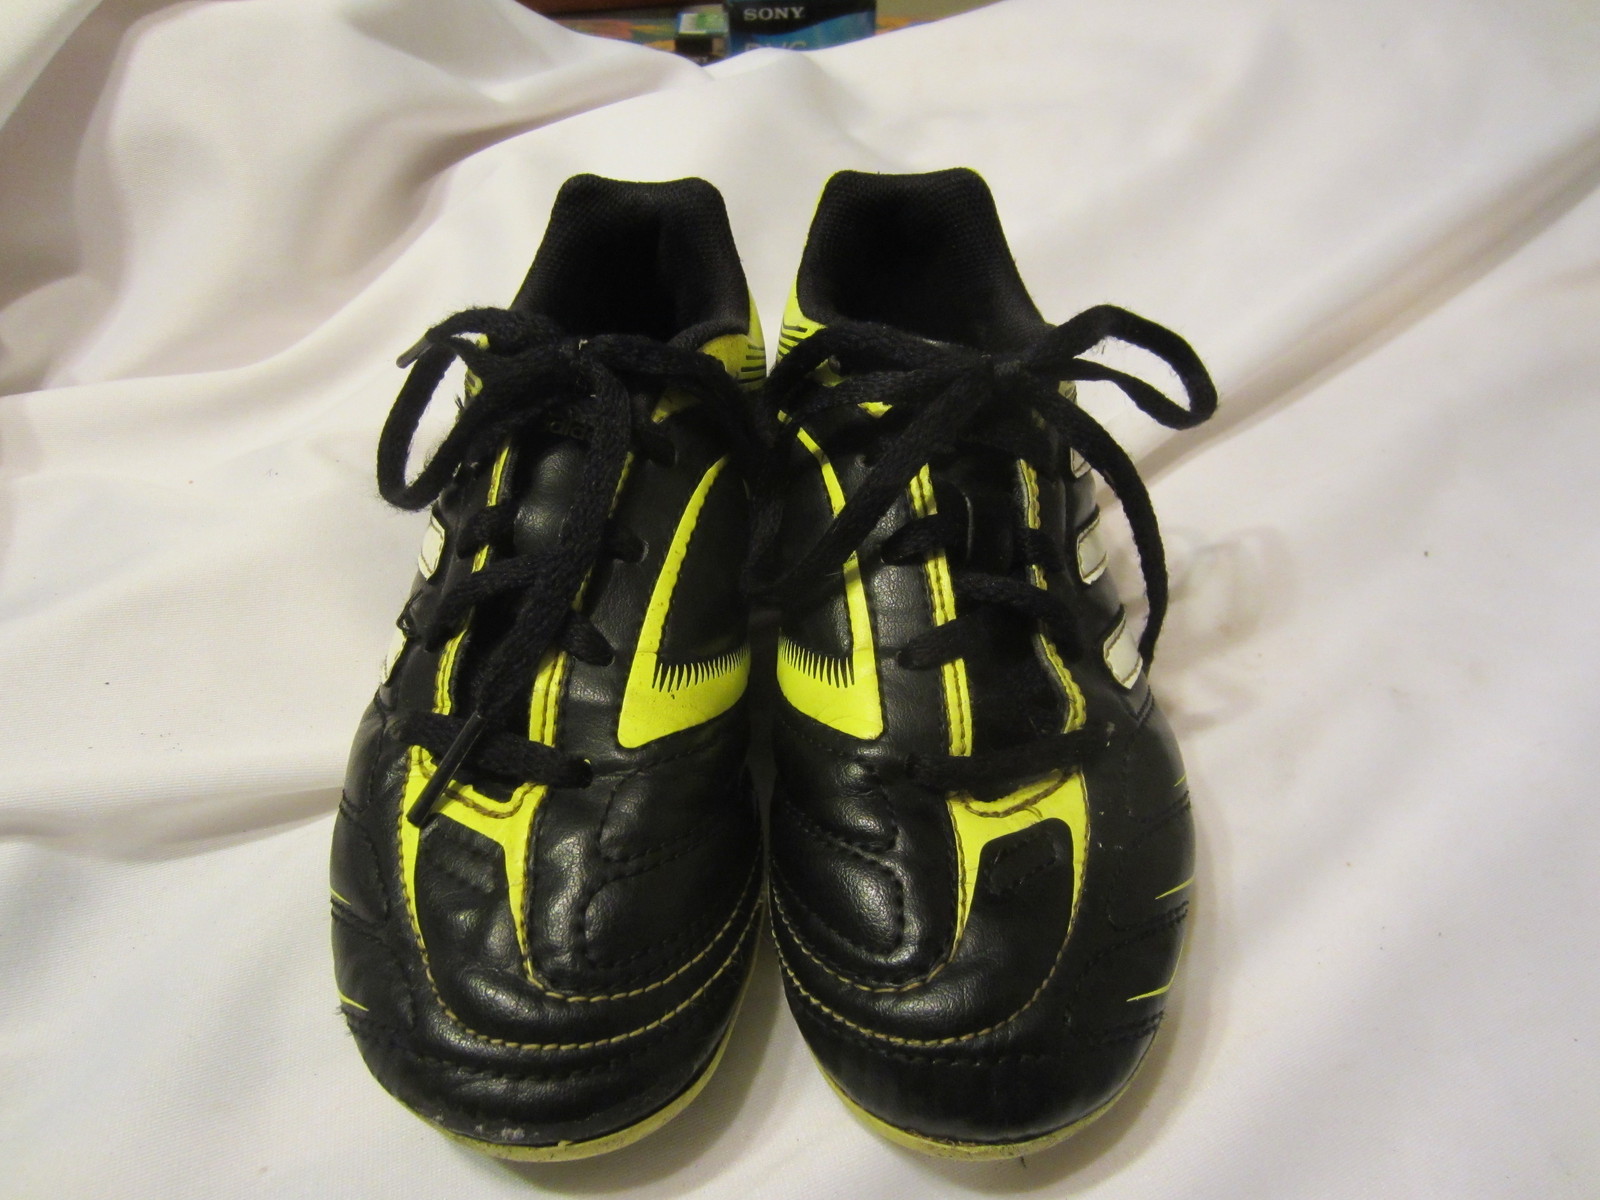 size 13.5 soccer cleats